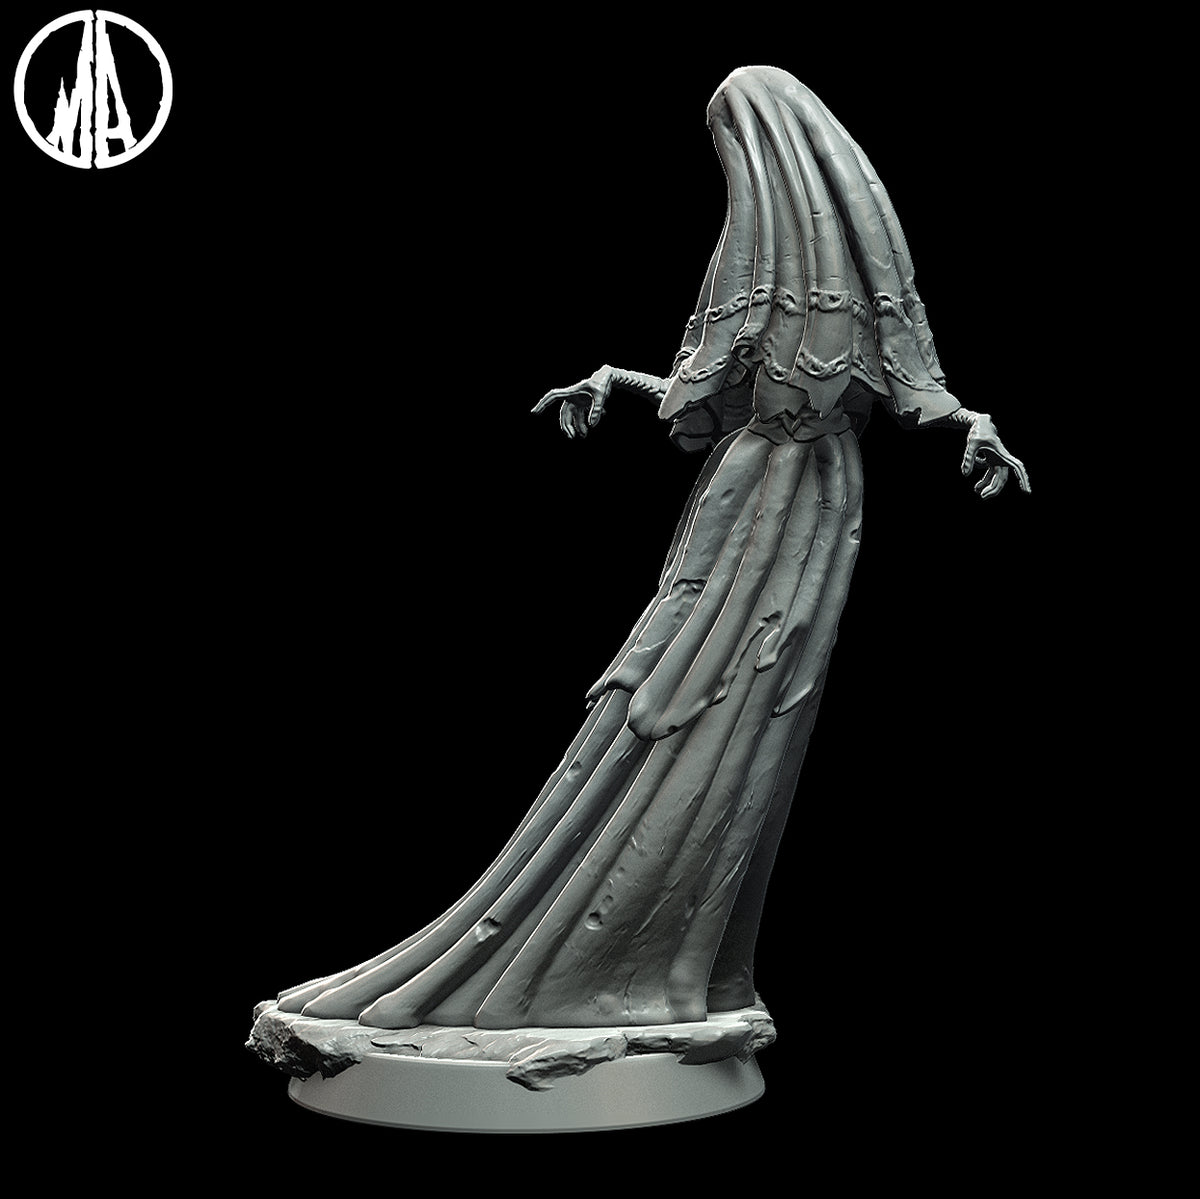 Weeping Widow | 32mm Scale Resin Model | From the Lost Souls Collection